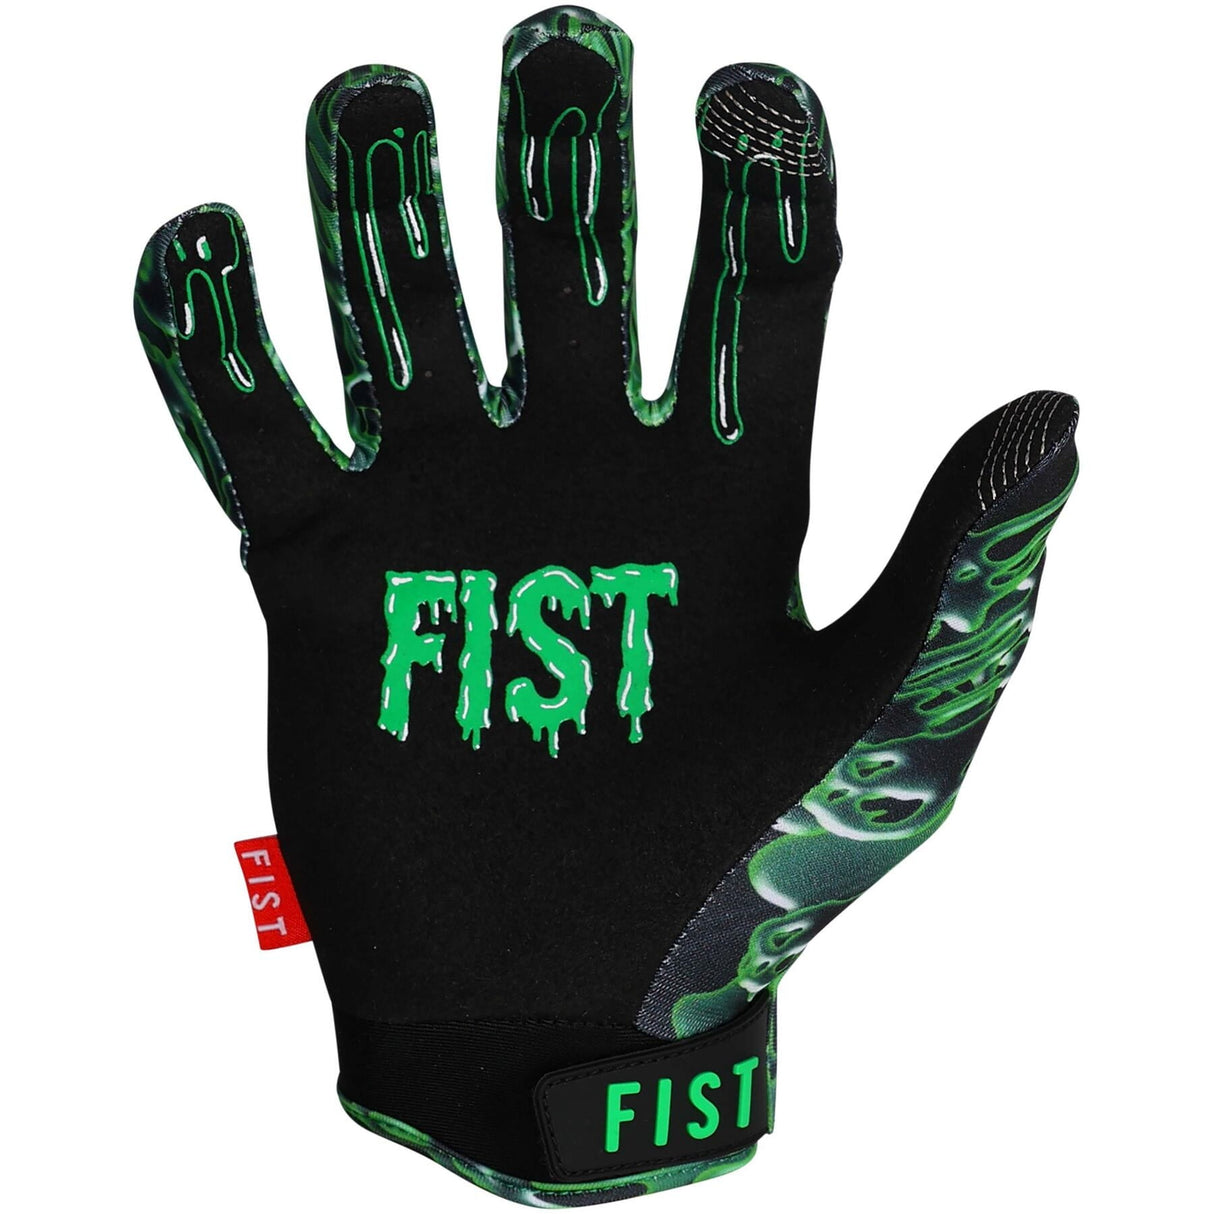 Fist Handwear Chapter 20 Collection - Lynx Lacey Slime Youth